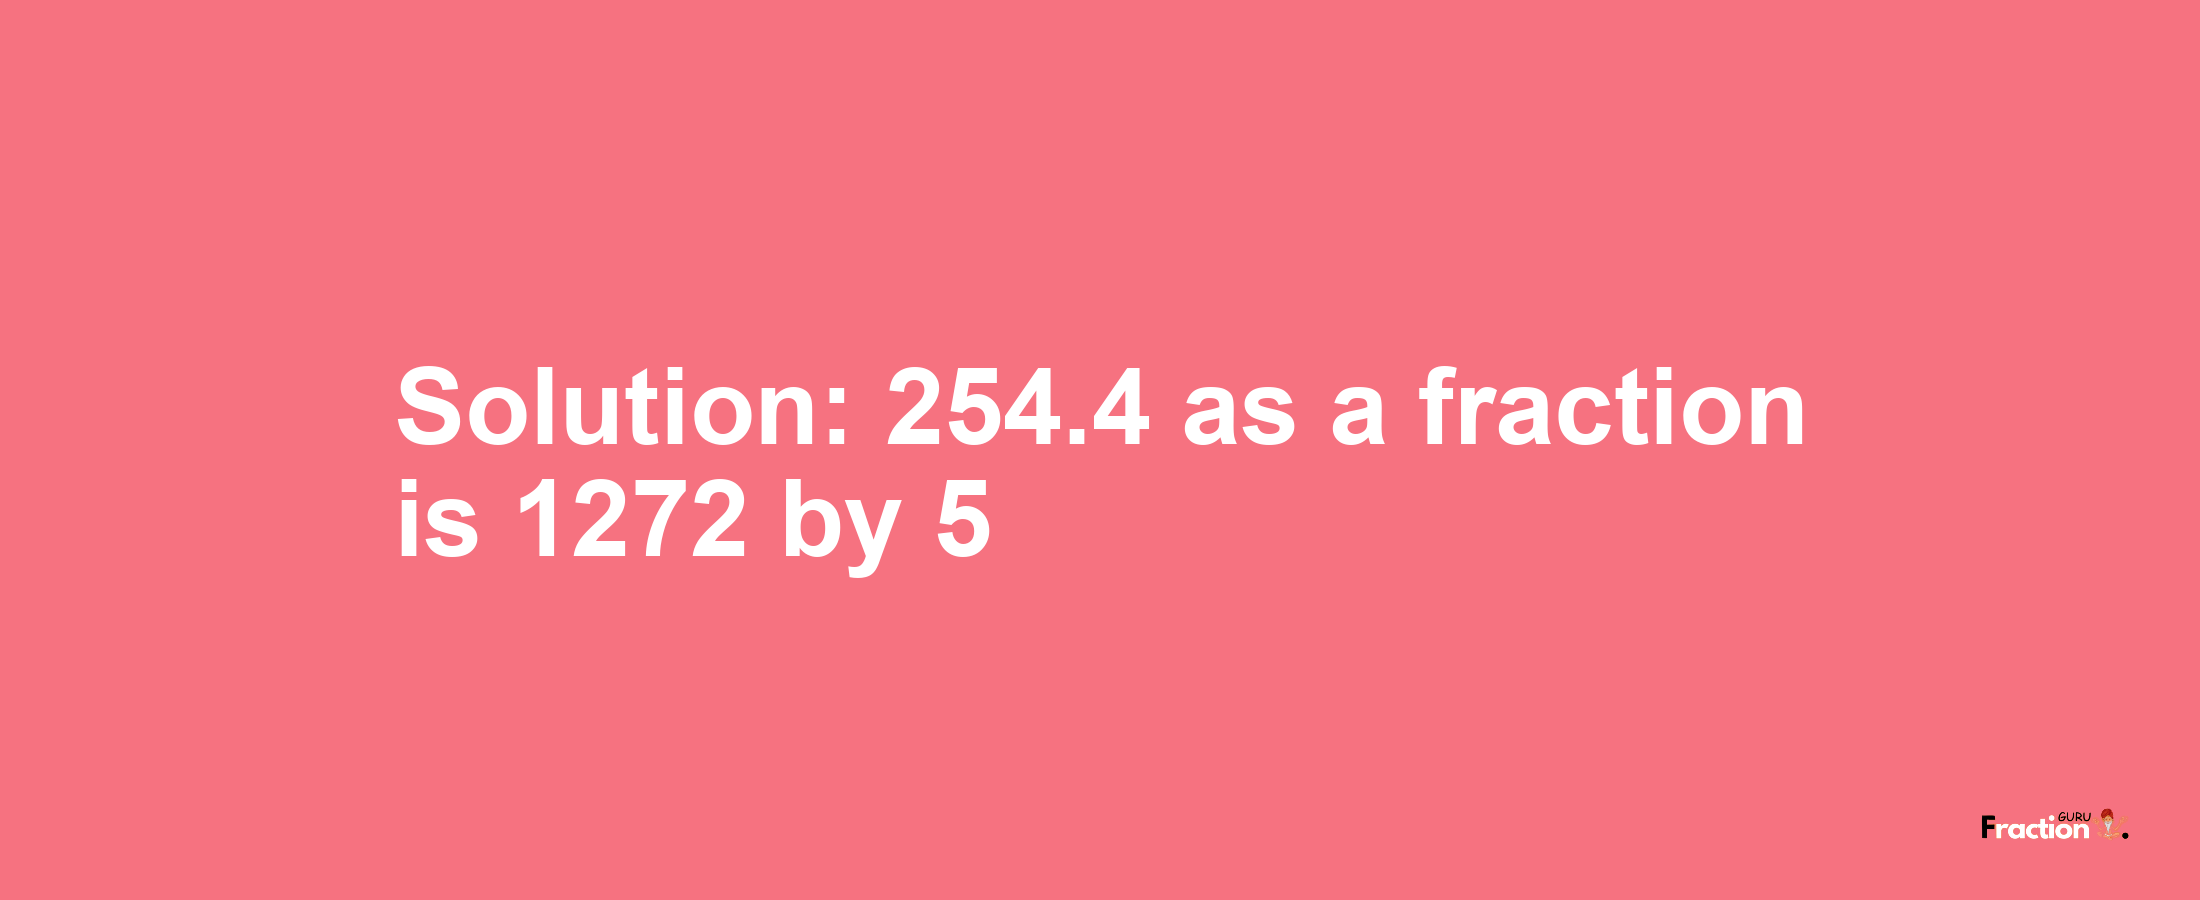 Solution:254.4 as a fraction is 1272/5